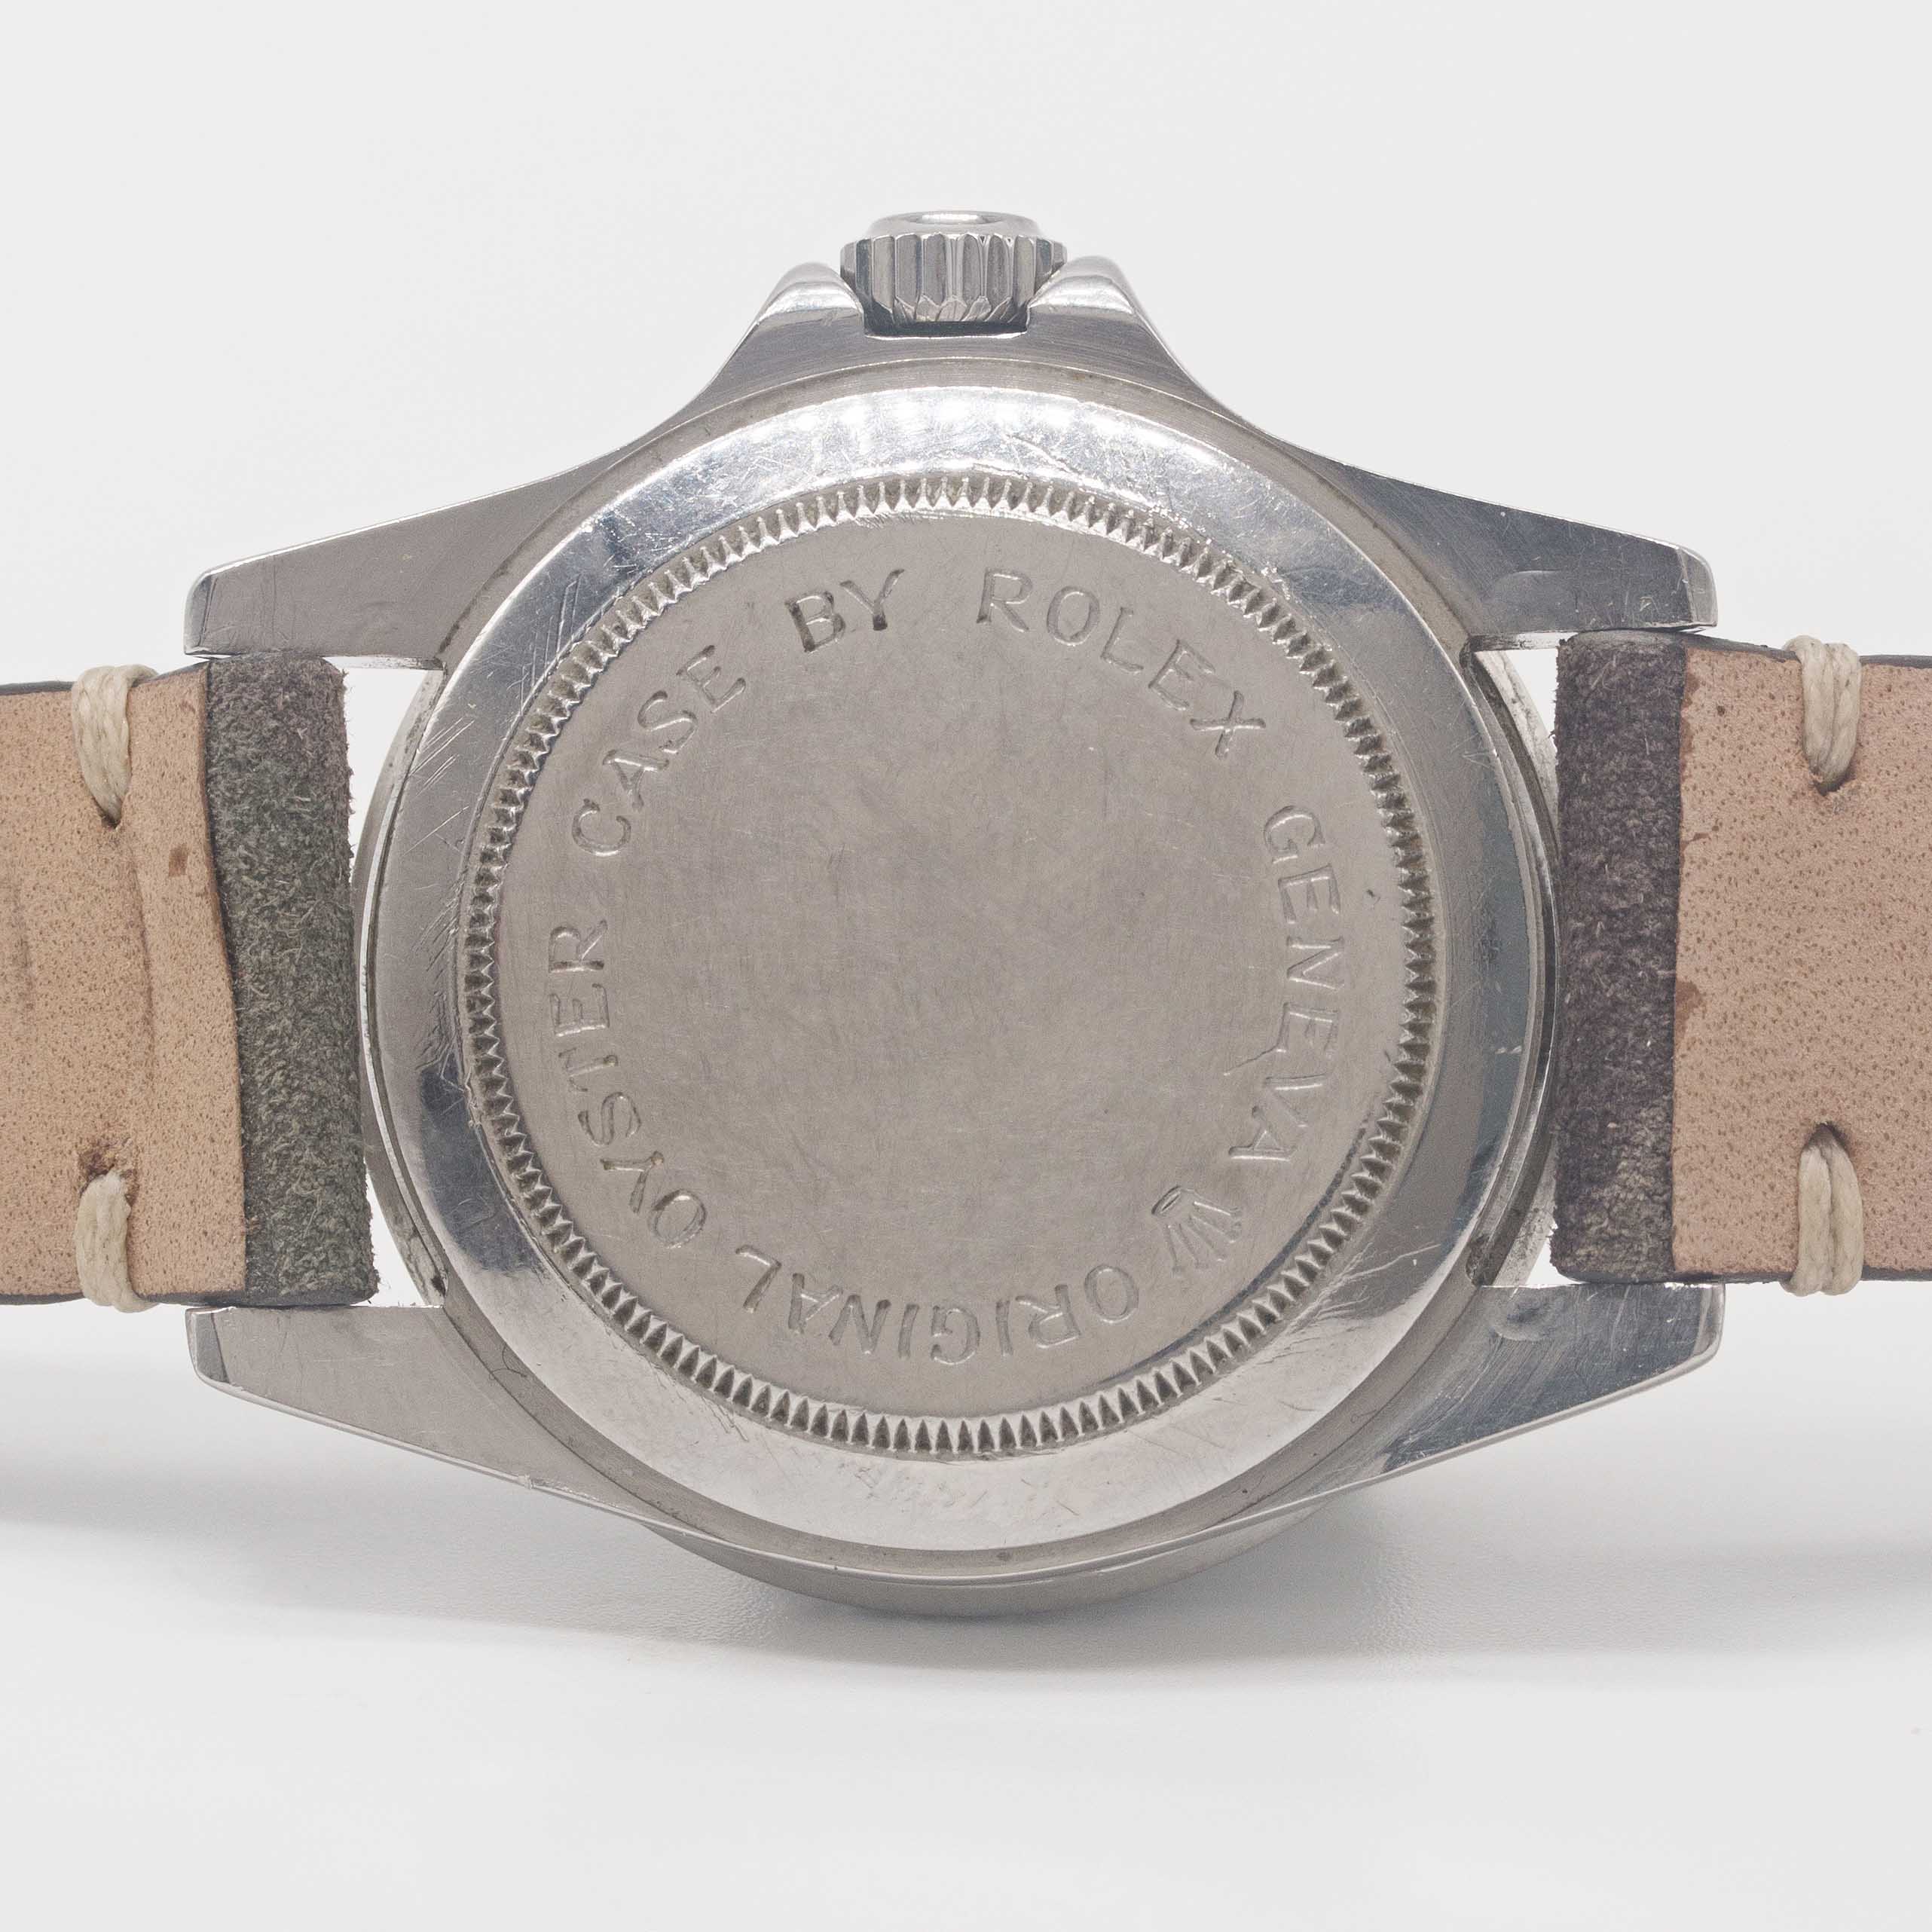 A GENTLEMAN'S STAINLESS STEEL ROLEX TUDOR OYSTER PRINCE SUBMARINER WRIST WATCH CIRCA 1967, REF. - Image 6 of 9